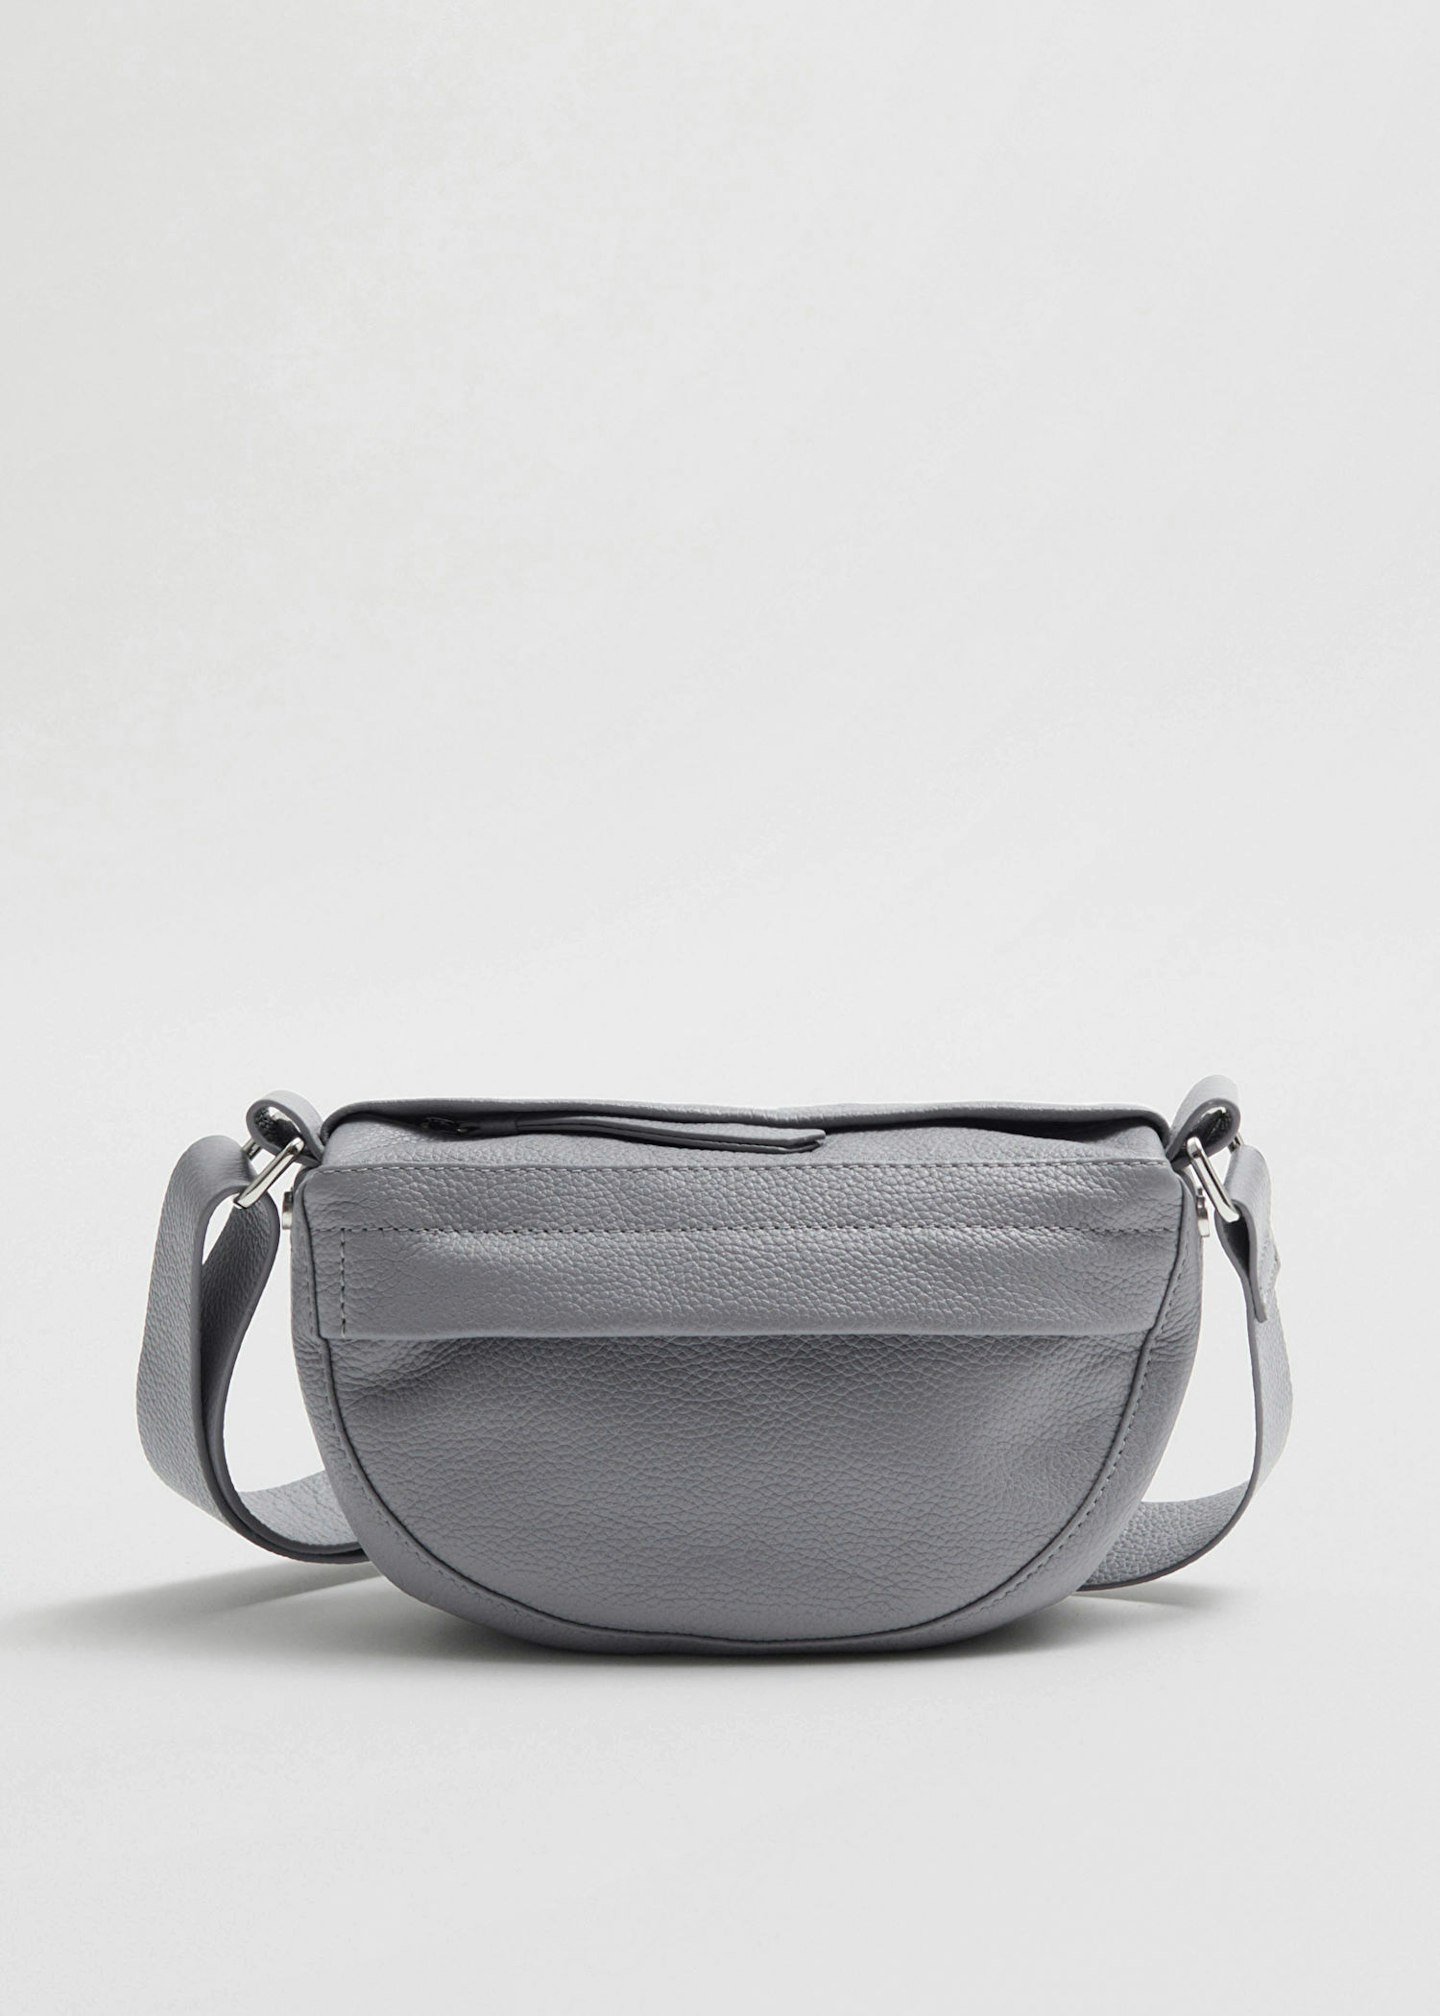 & Other Stories Small Soft Leather Crossbody Bag